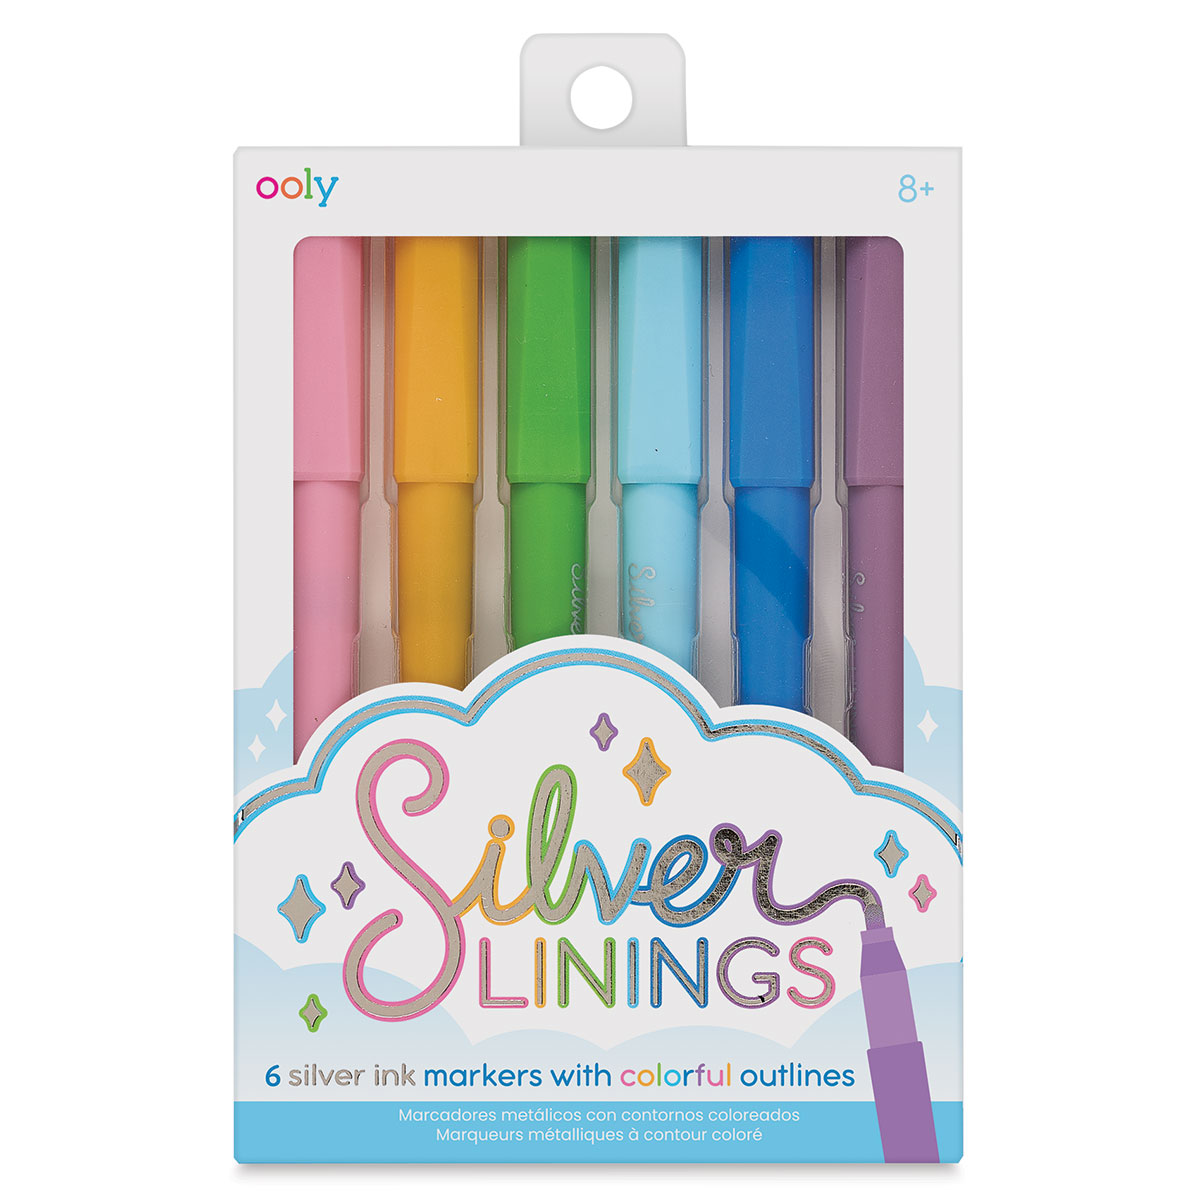 Ooly Silver Linings Outline Markers